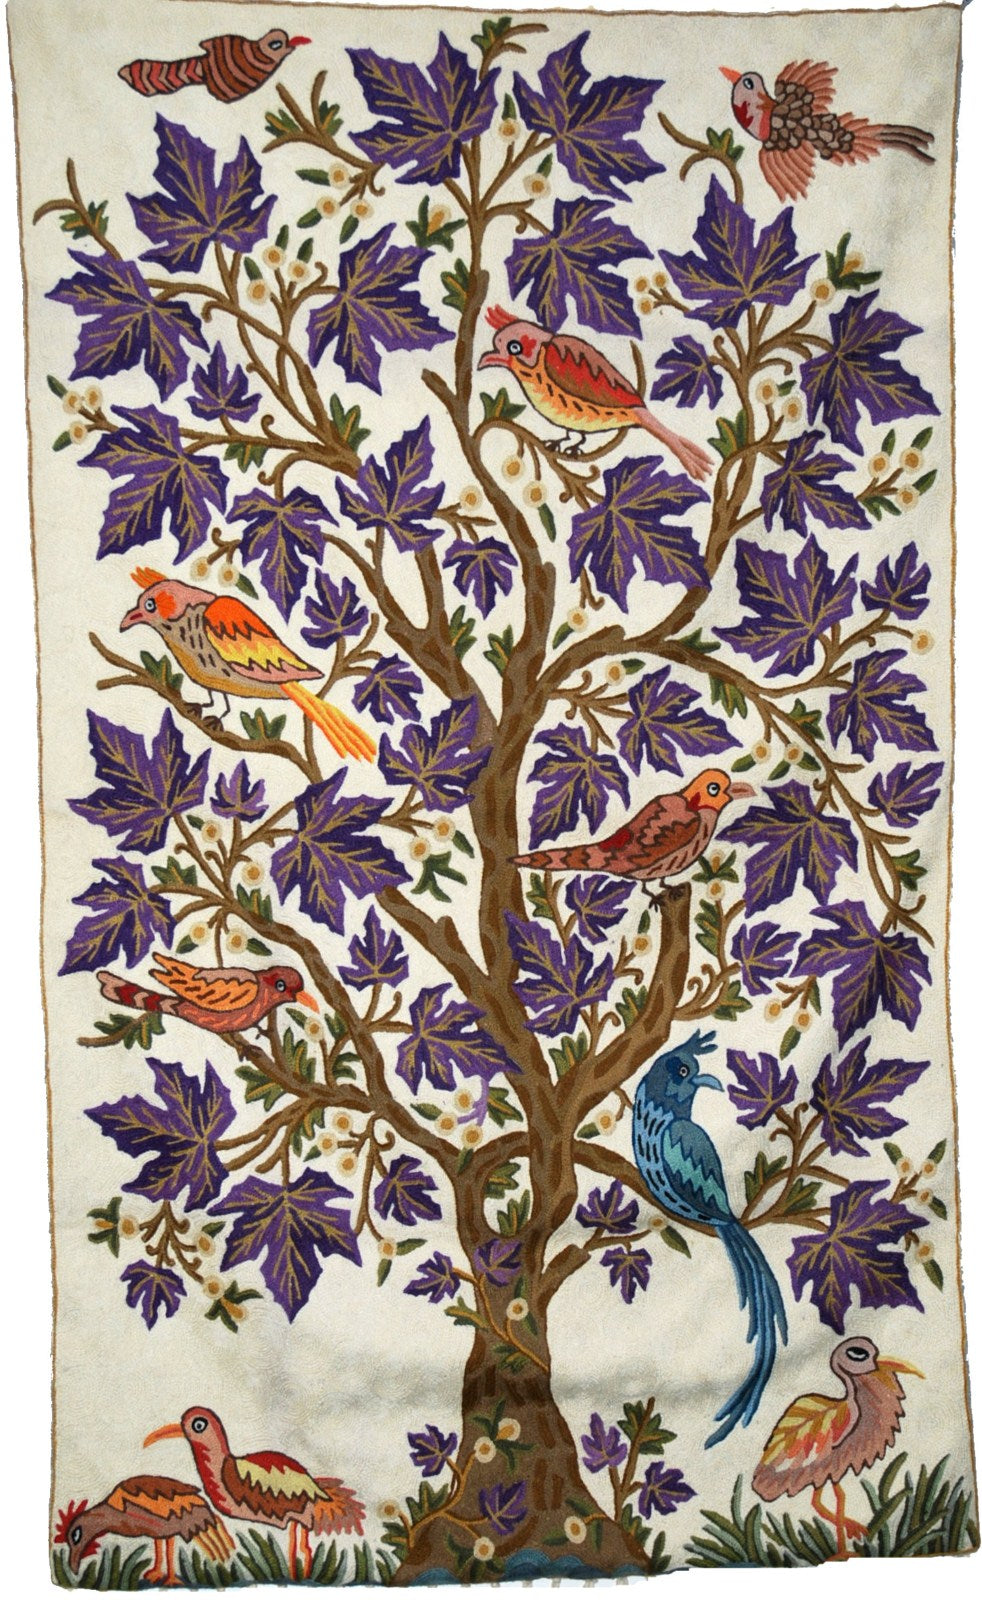 ChainStitch Tapestry Area Rug "Tree of Life Birds", Multicolor Wool Embroidery 3x5 feet #CWR15131